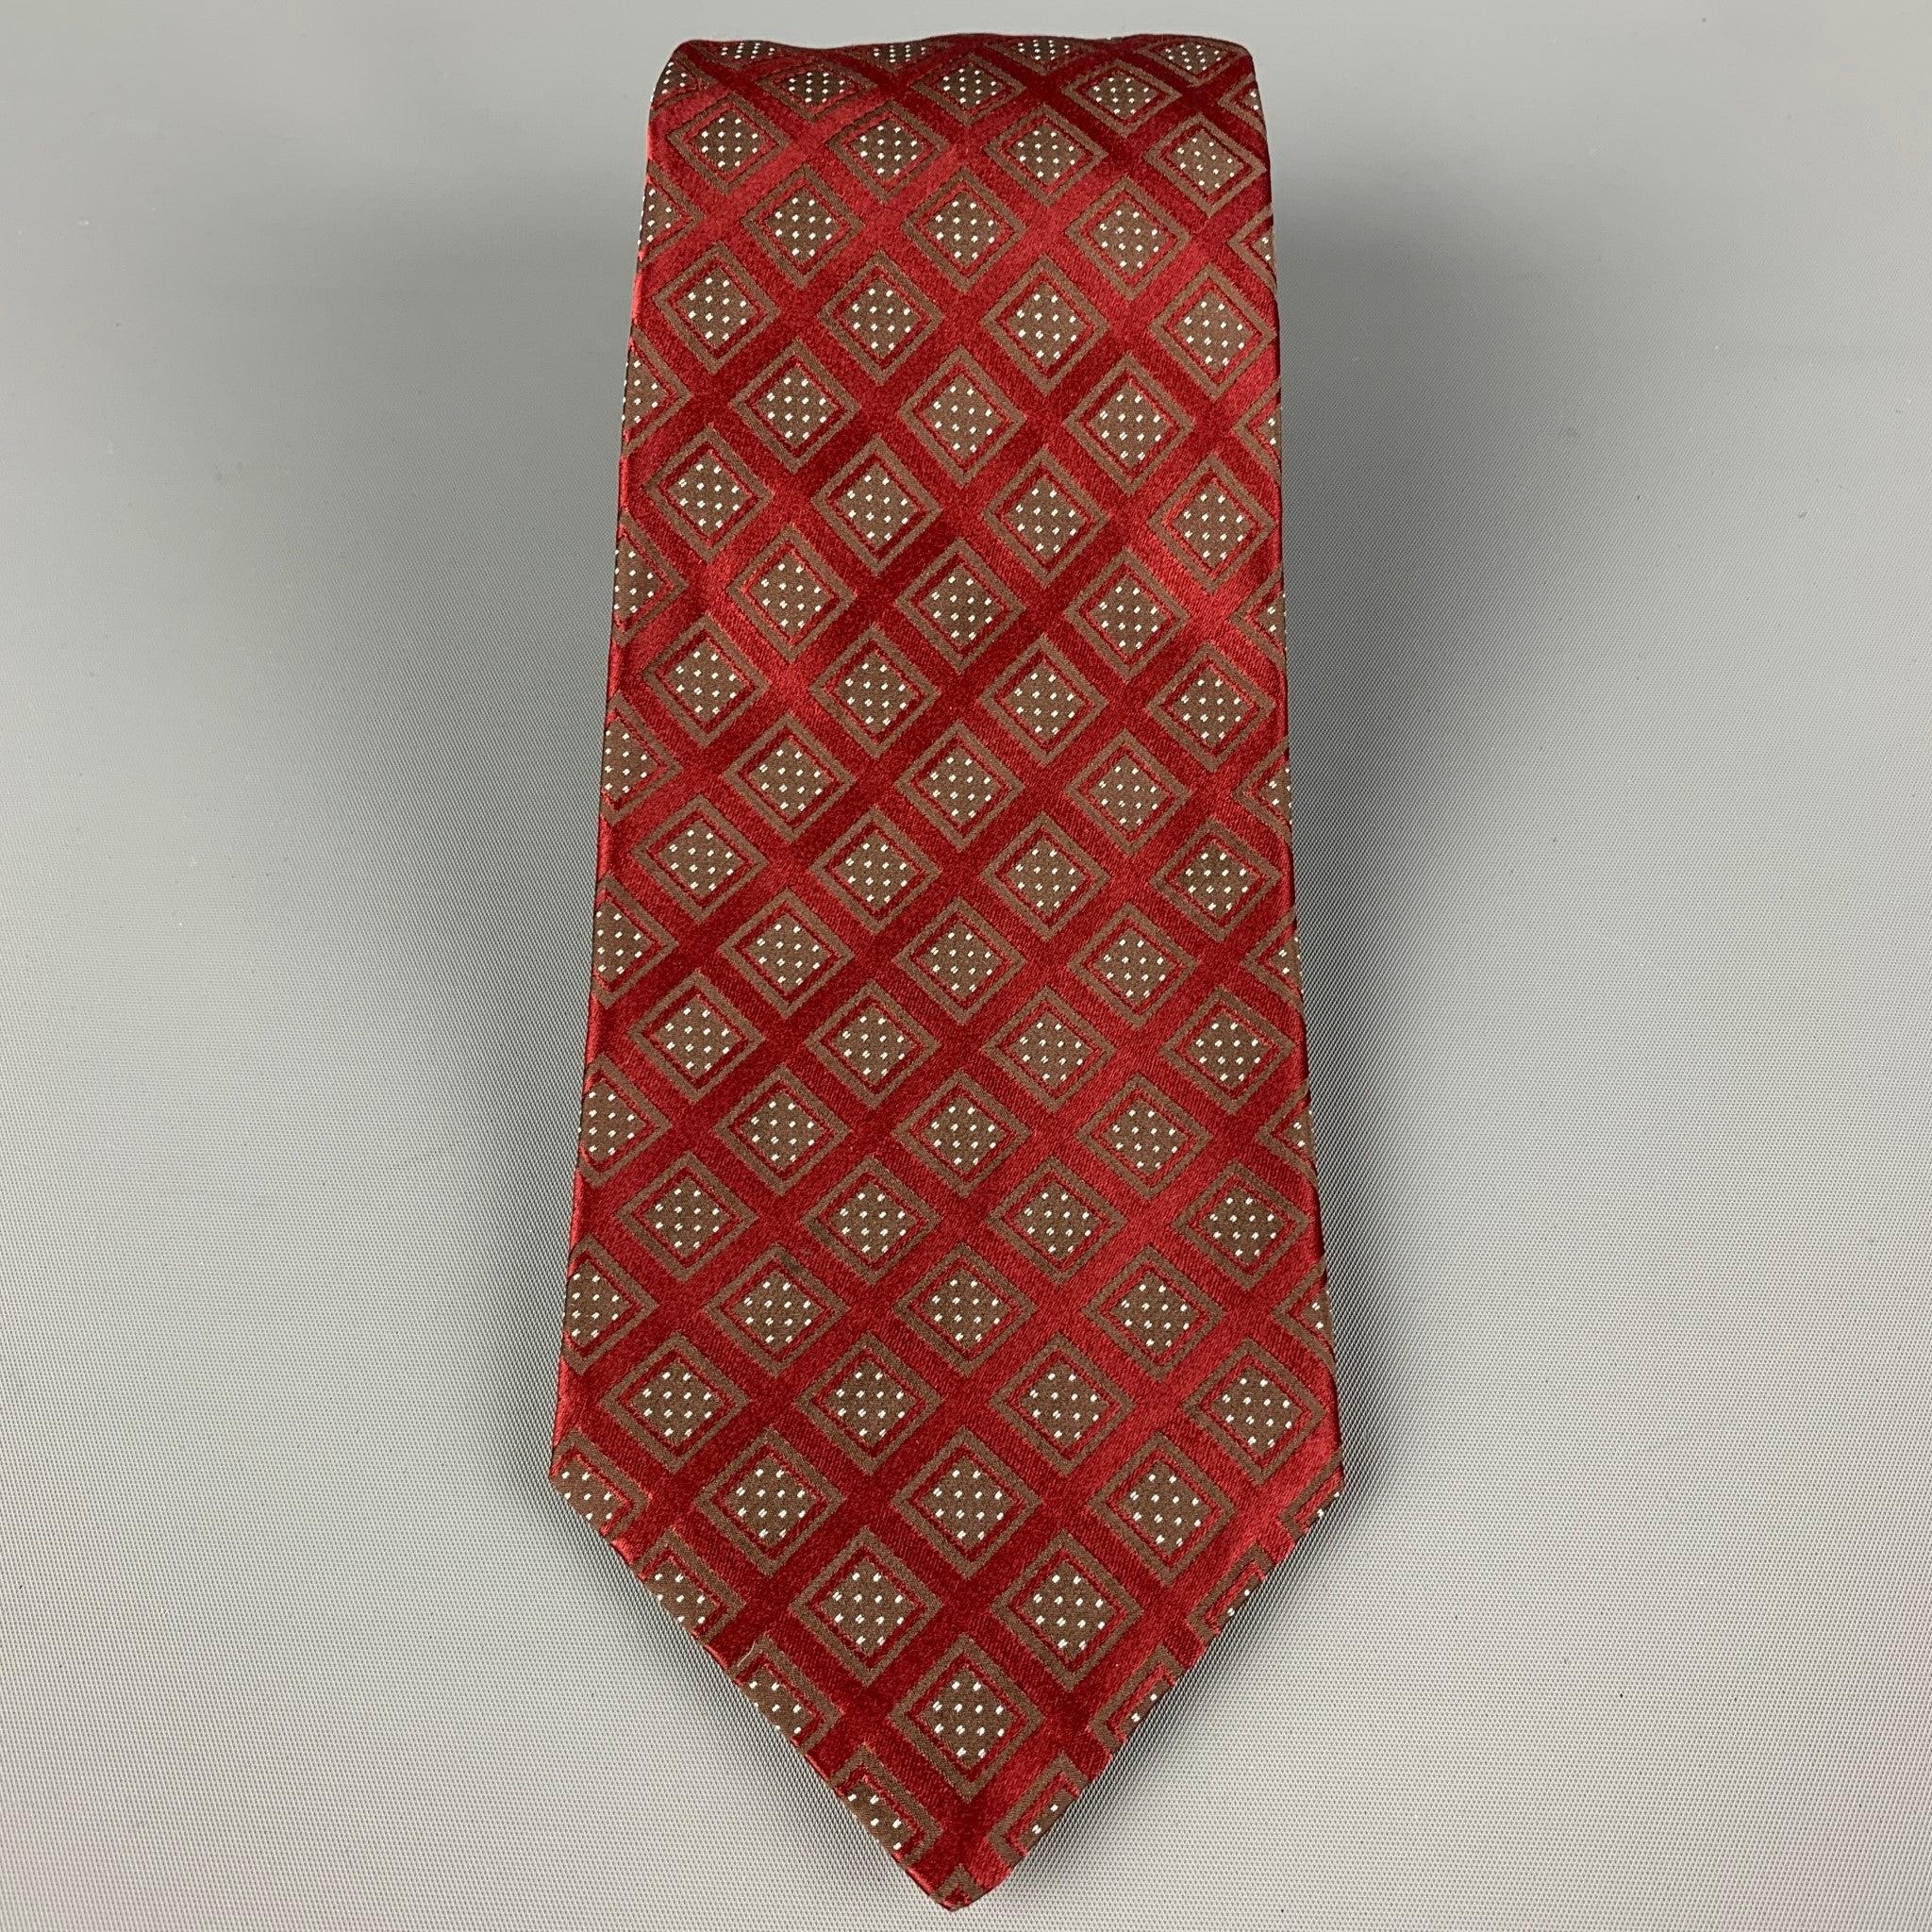 KITON necktie comes in a burgundy & taupe silk with a all over rhombus print. Made in Italy . Very Good Pre-Owned Condition.Width: 3.75 inches Length: 60 inches 
 

 

  
  
  
 Sui Generis Reference: 120365
 Category: Tie
 More Details
  
 Brand: